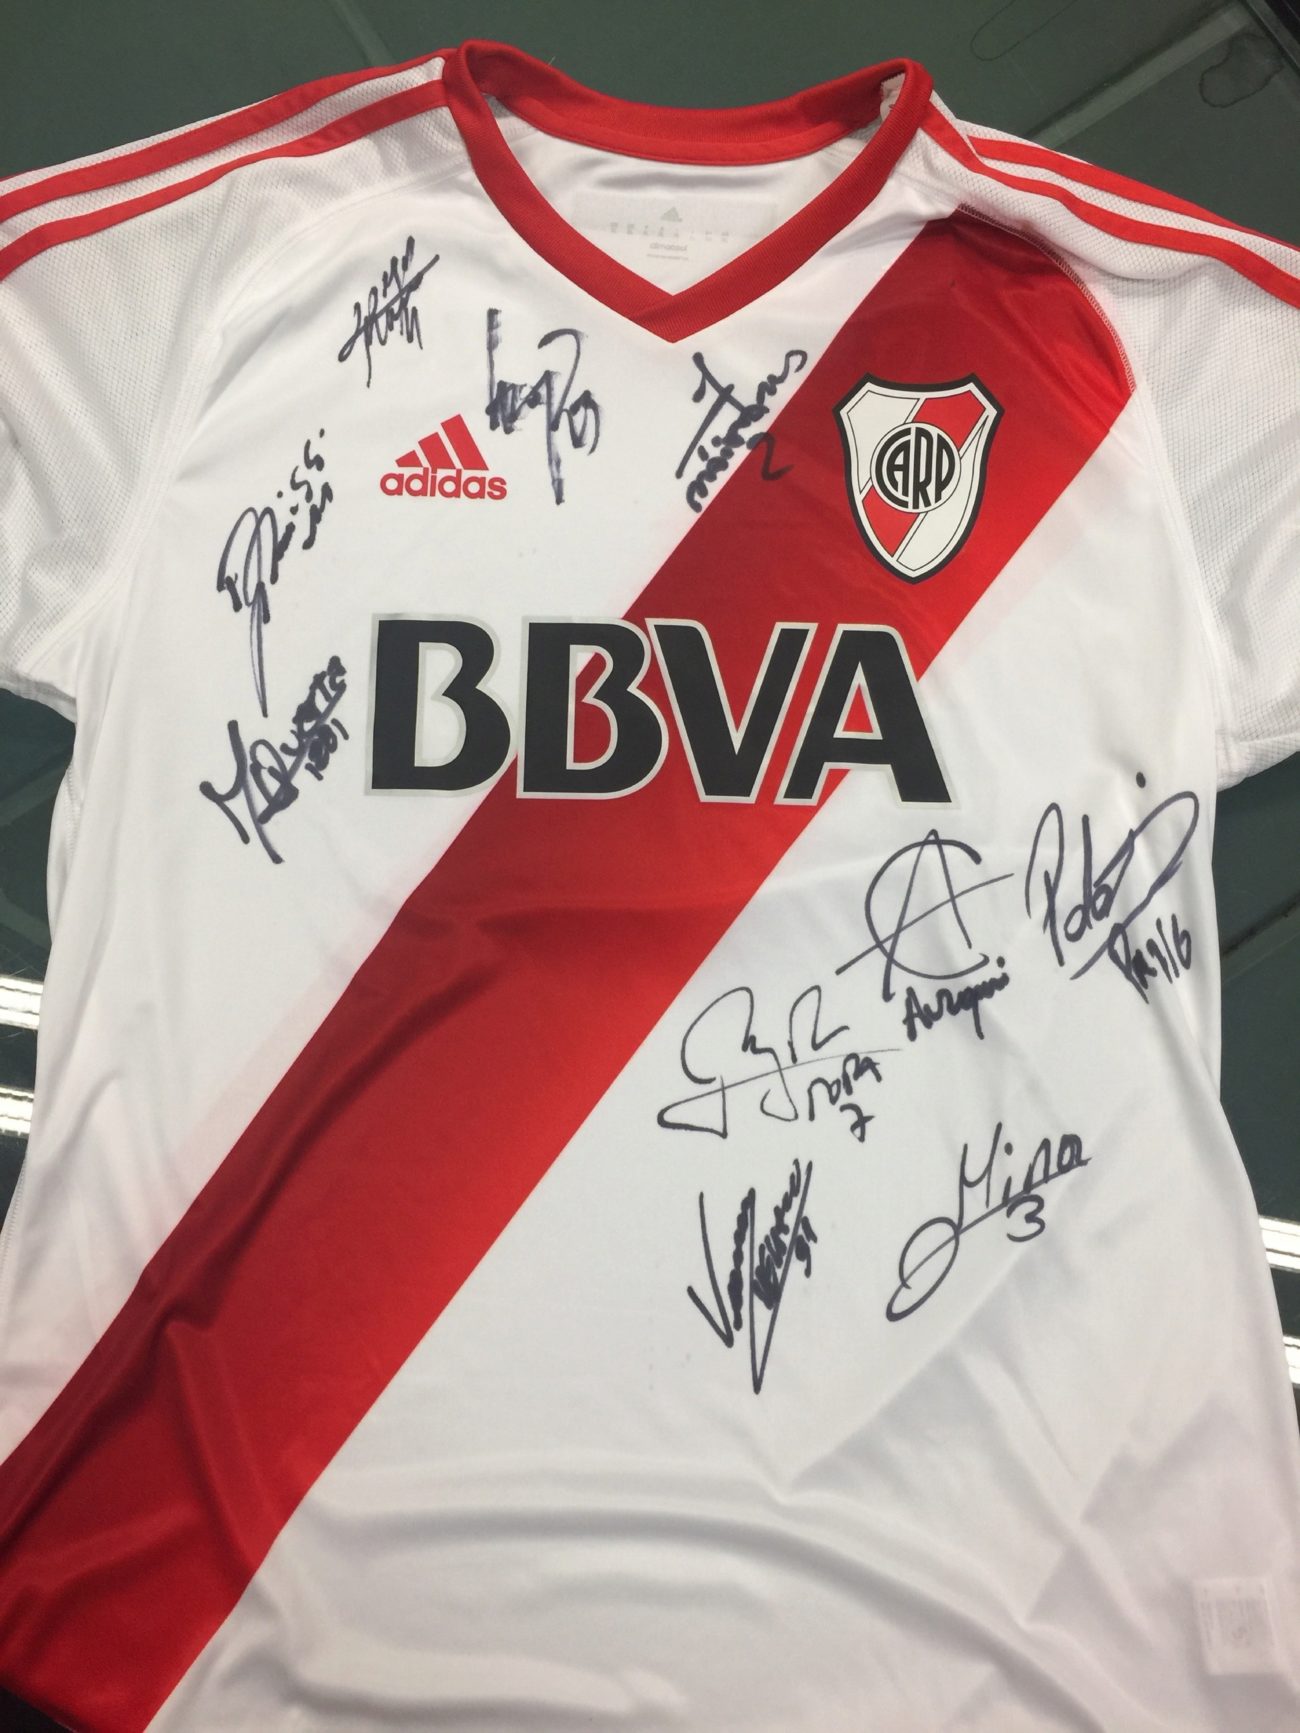 River Plate (Adidas).